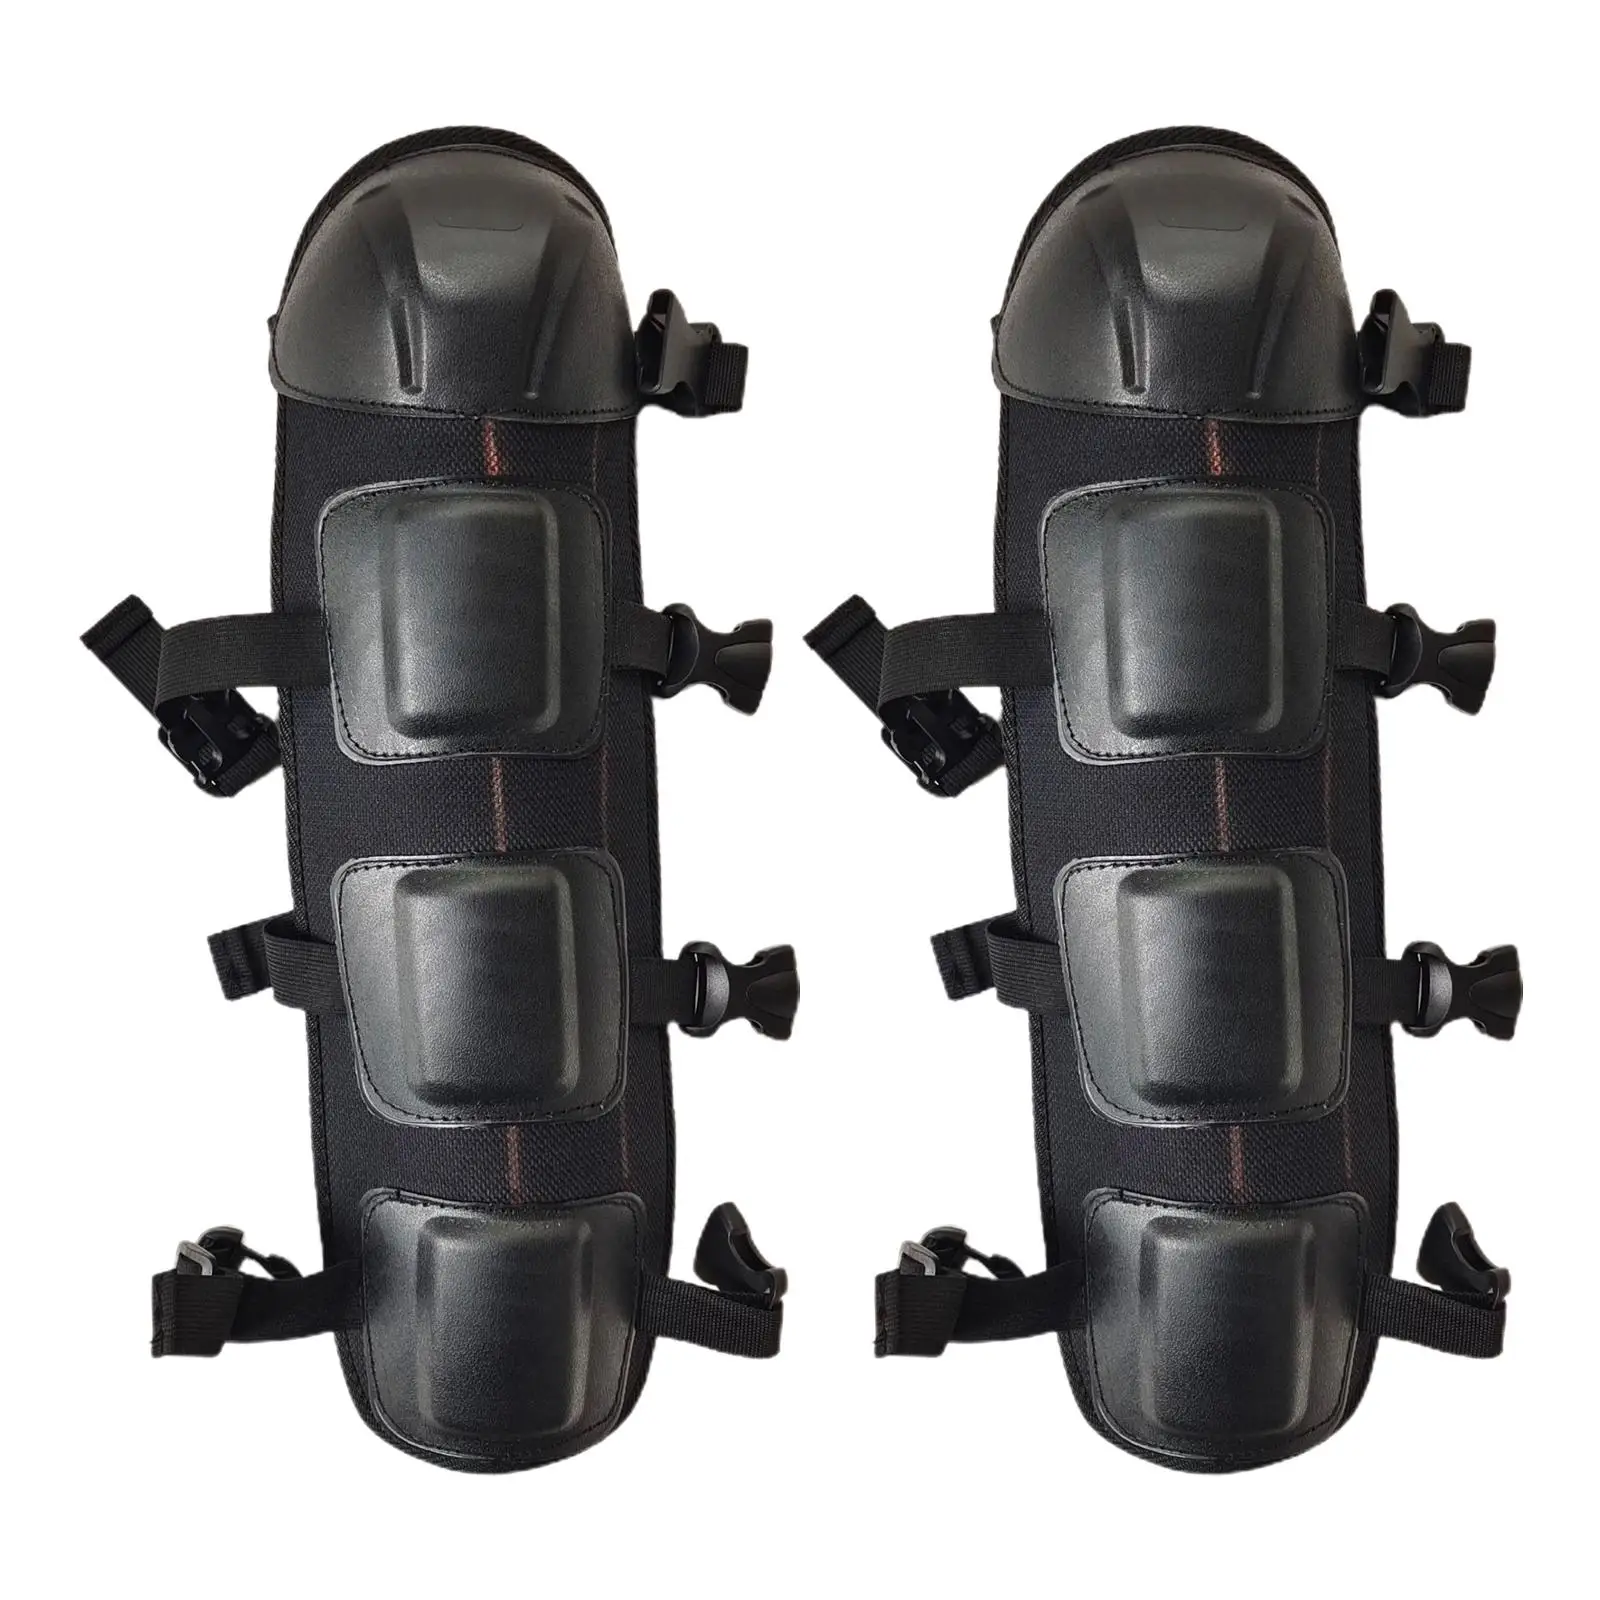 Knee Pads Kneelet Protective Gear Motorcycle Protective for Home Ski Scooter